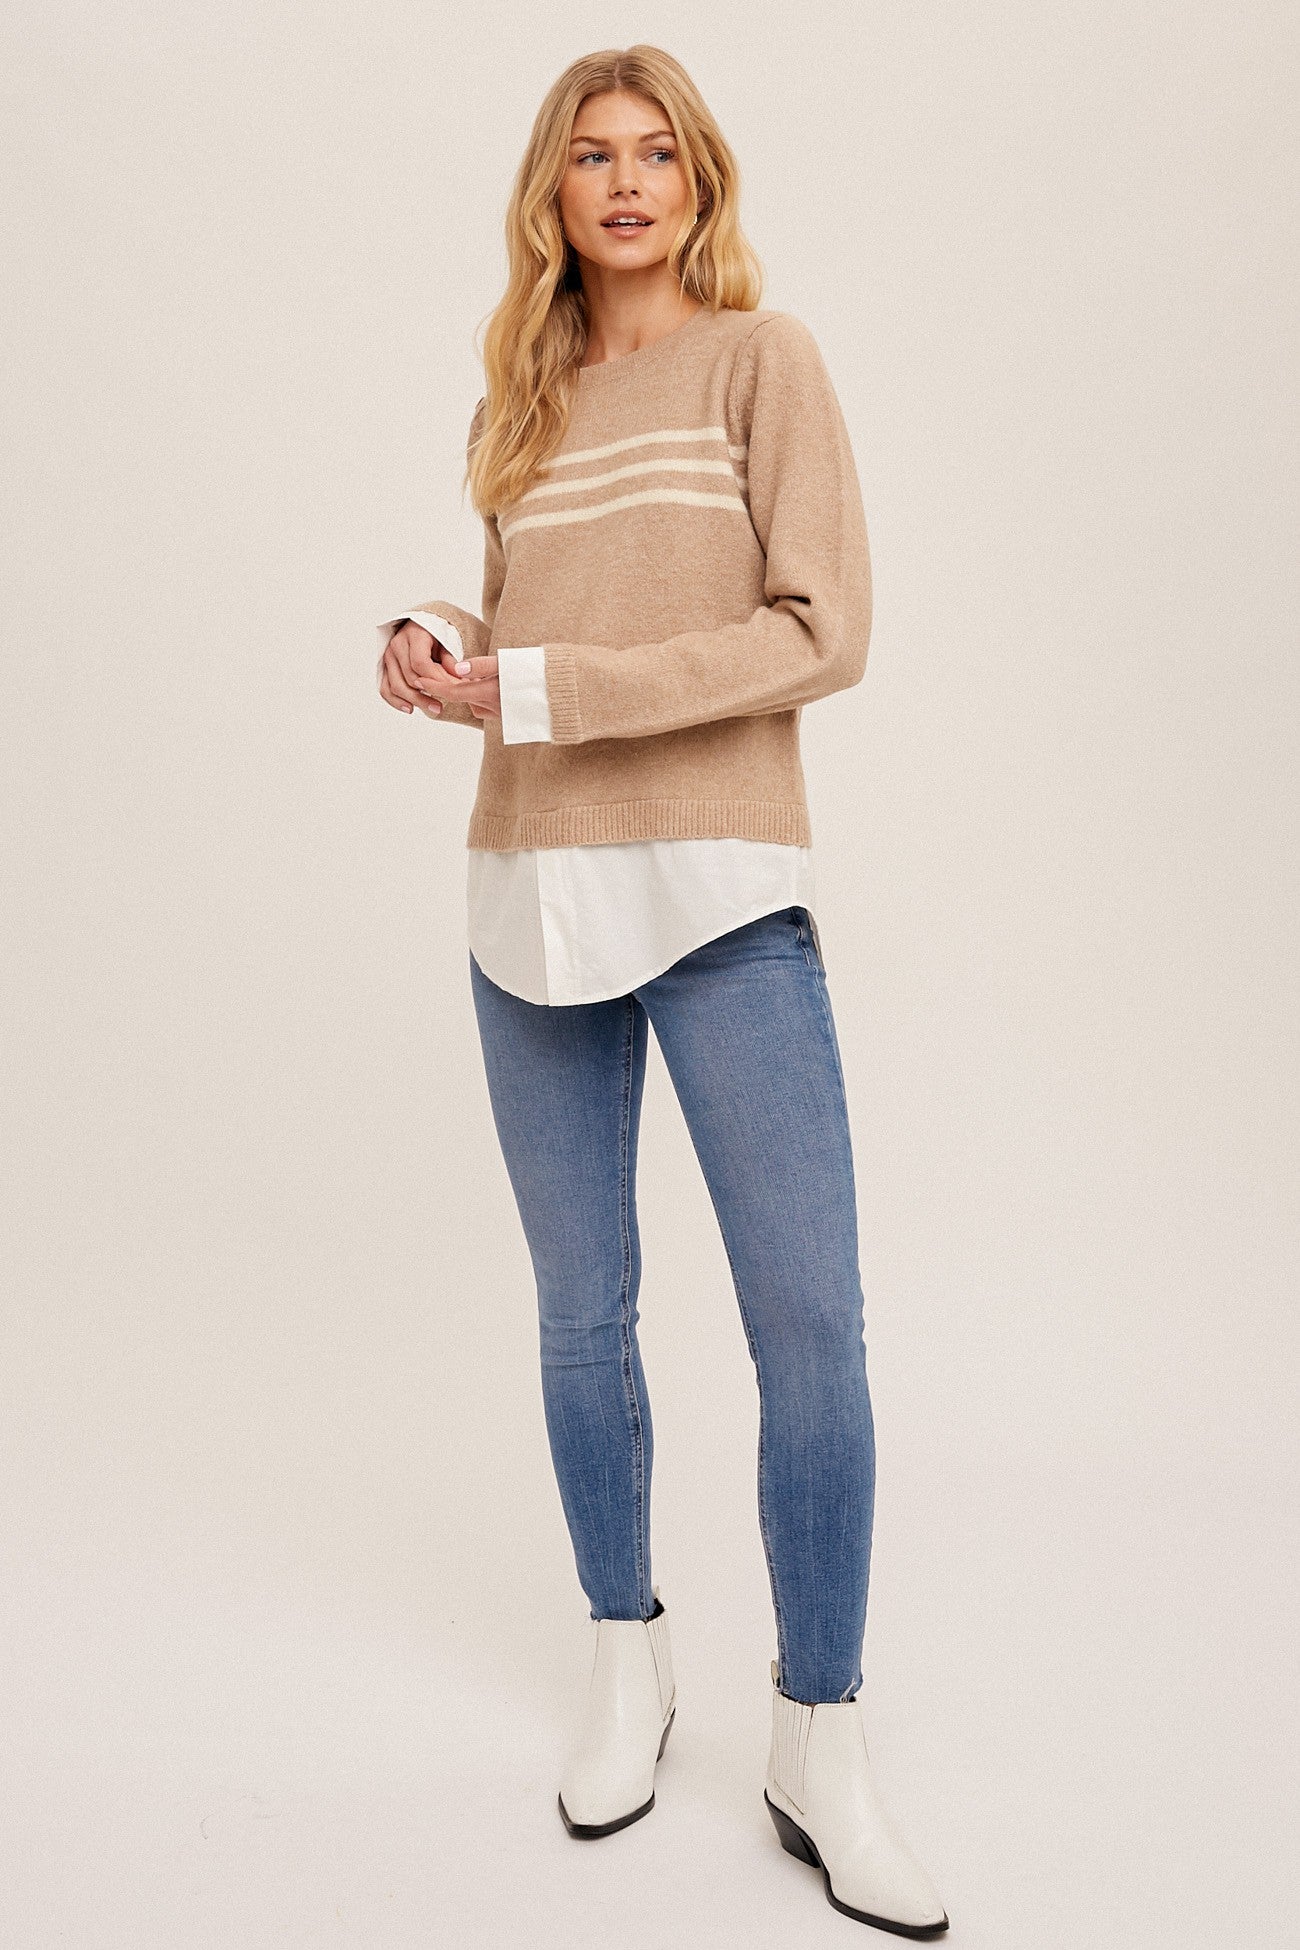 Woven Contrast Sweater Tunic